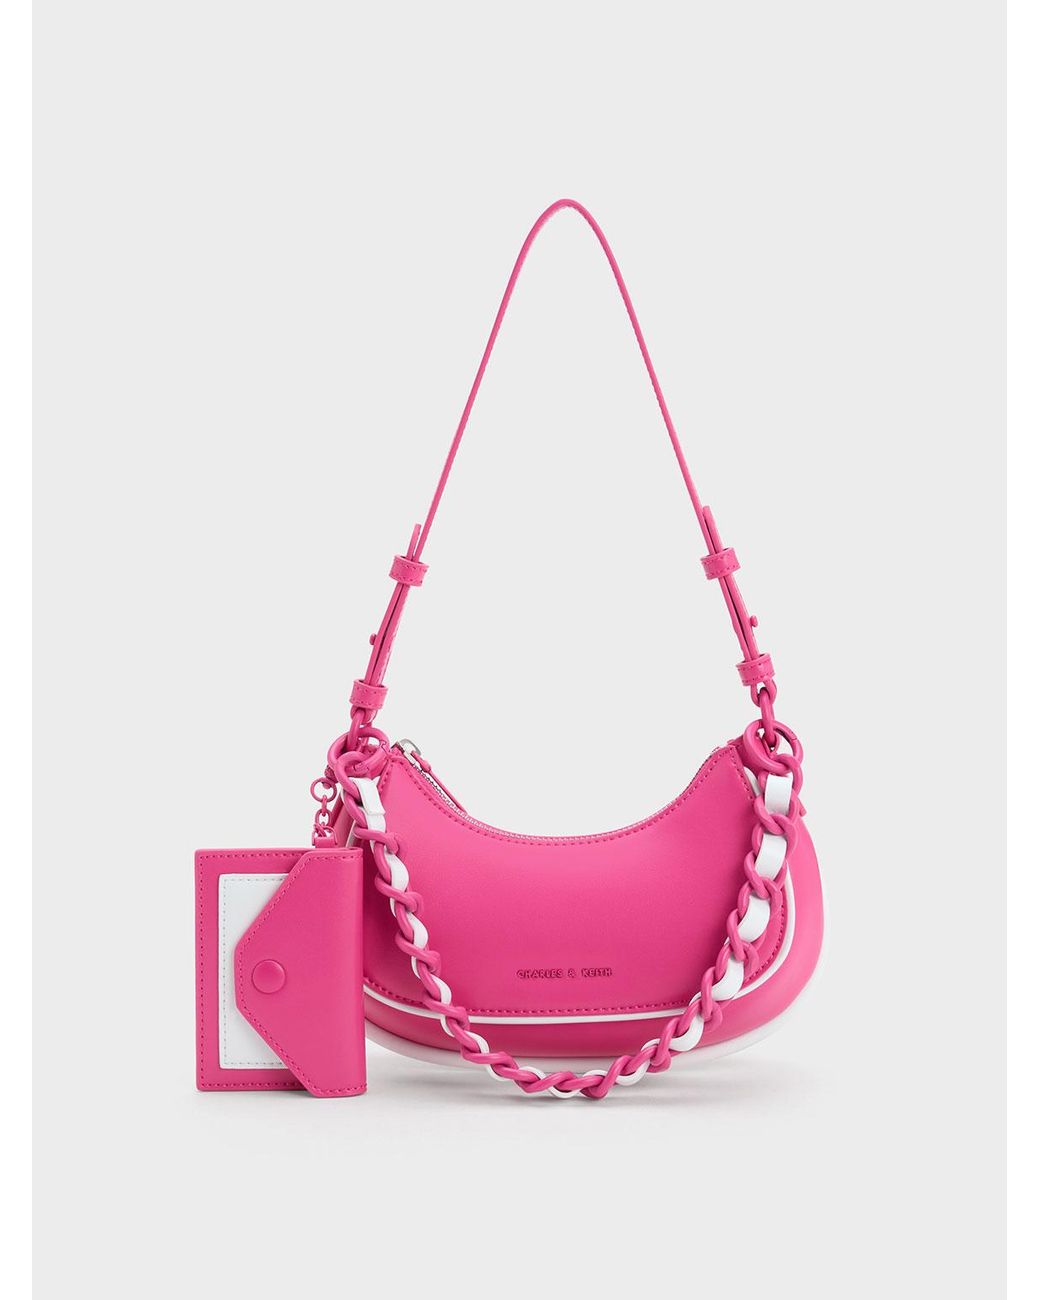 Charles & Keith Alouette Curved Shoulder Bag in Pink | Lyst Australia